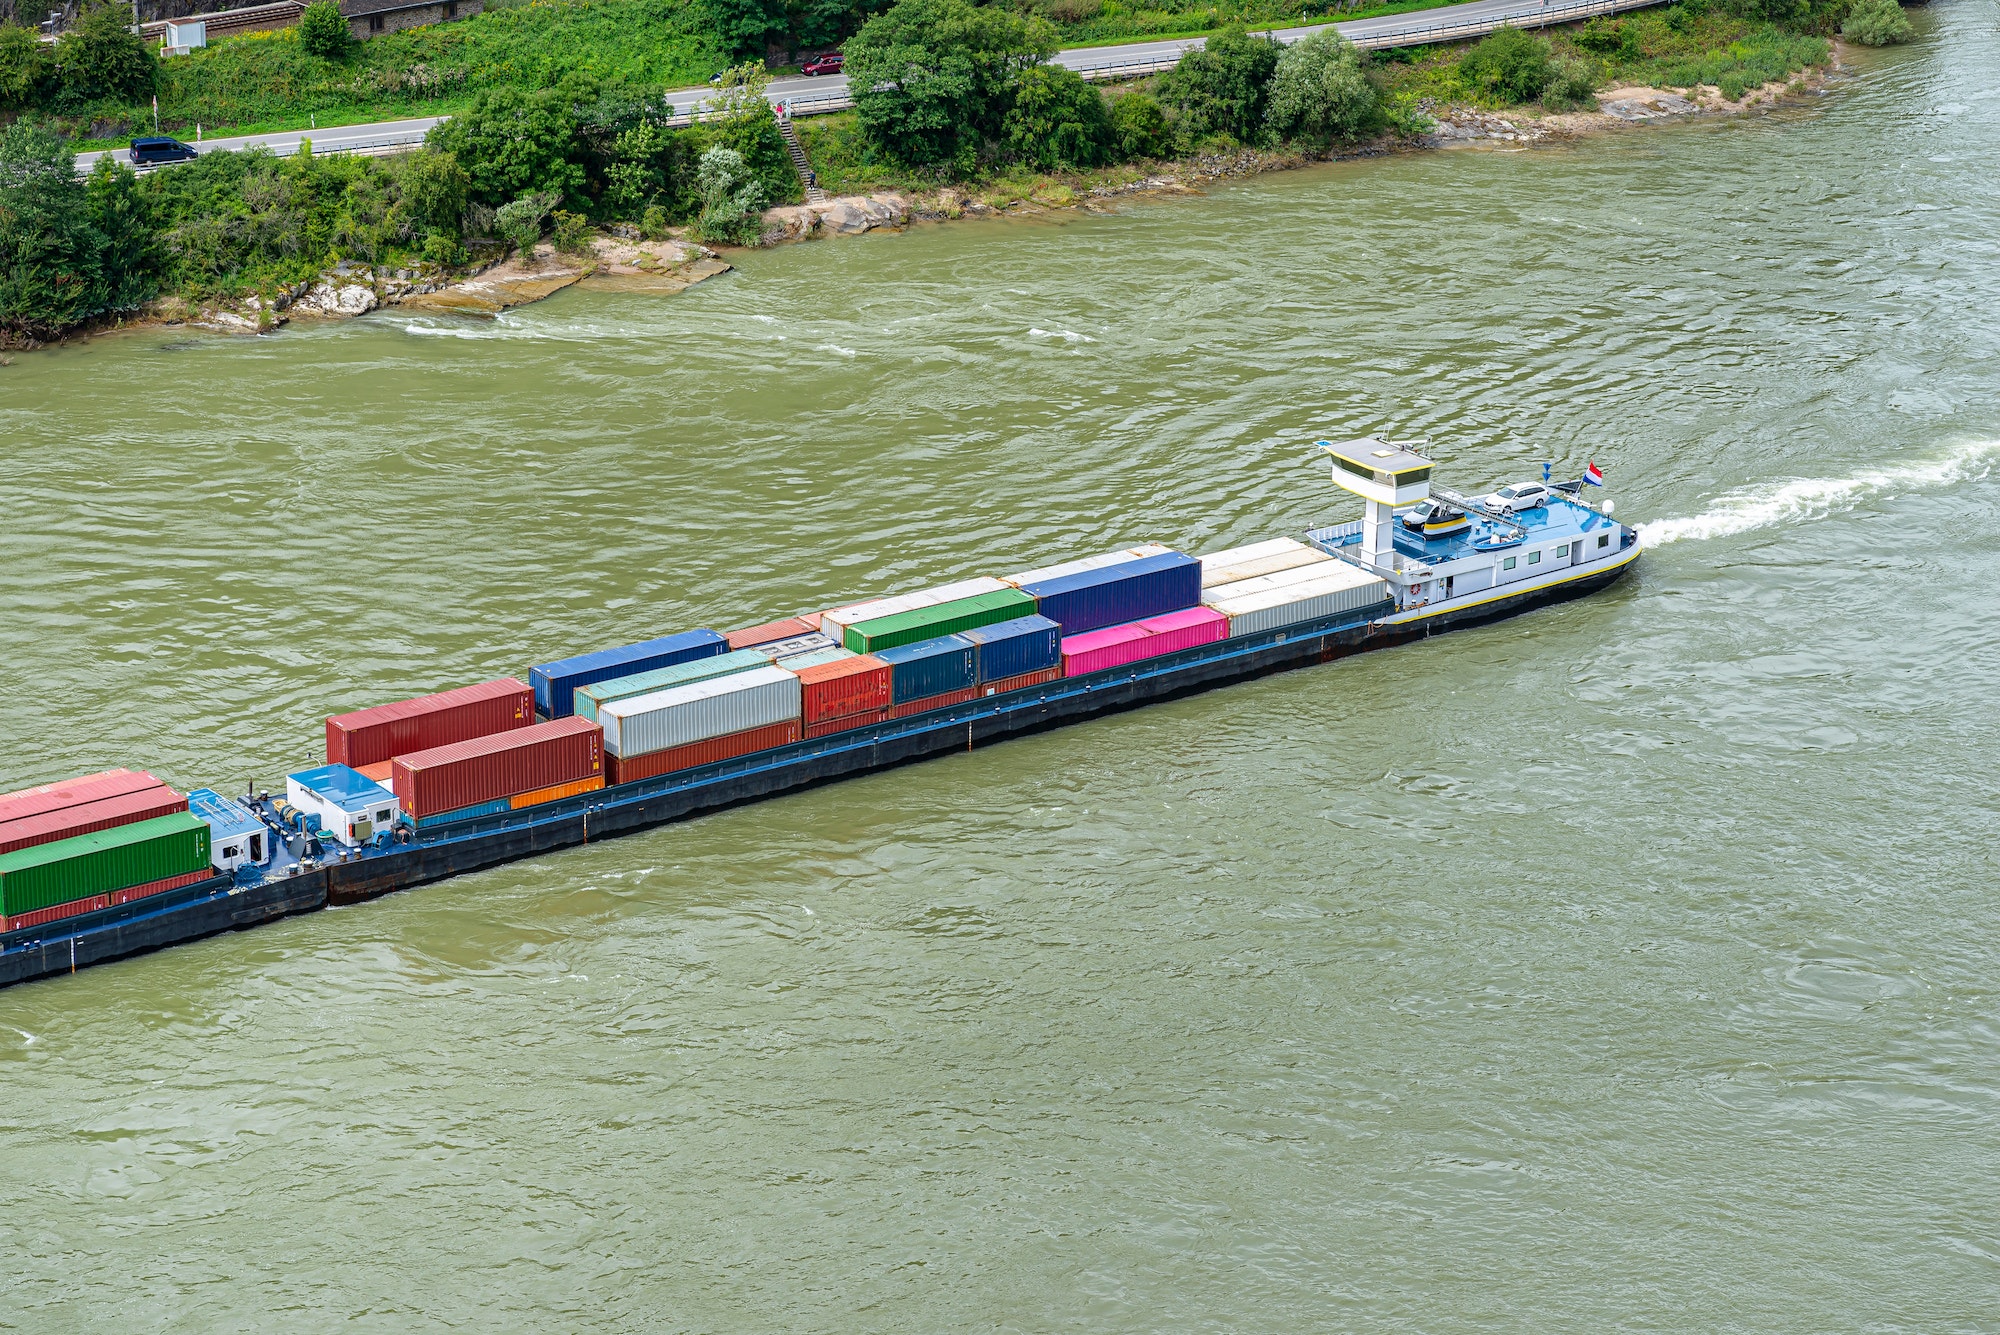 A container ship barge sailing on the river Rhine in western Germany, visible road, aerial view.